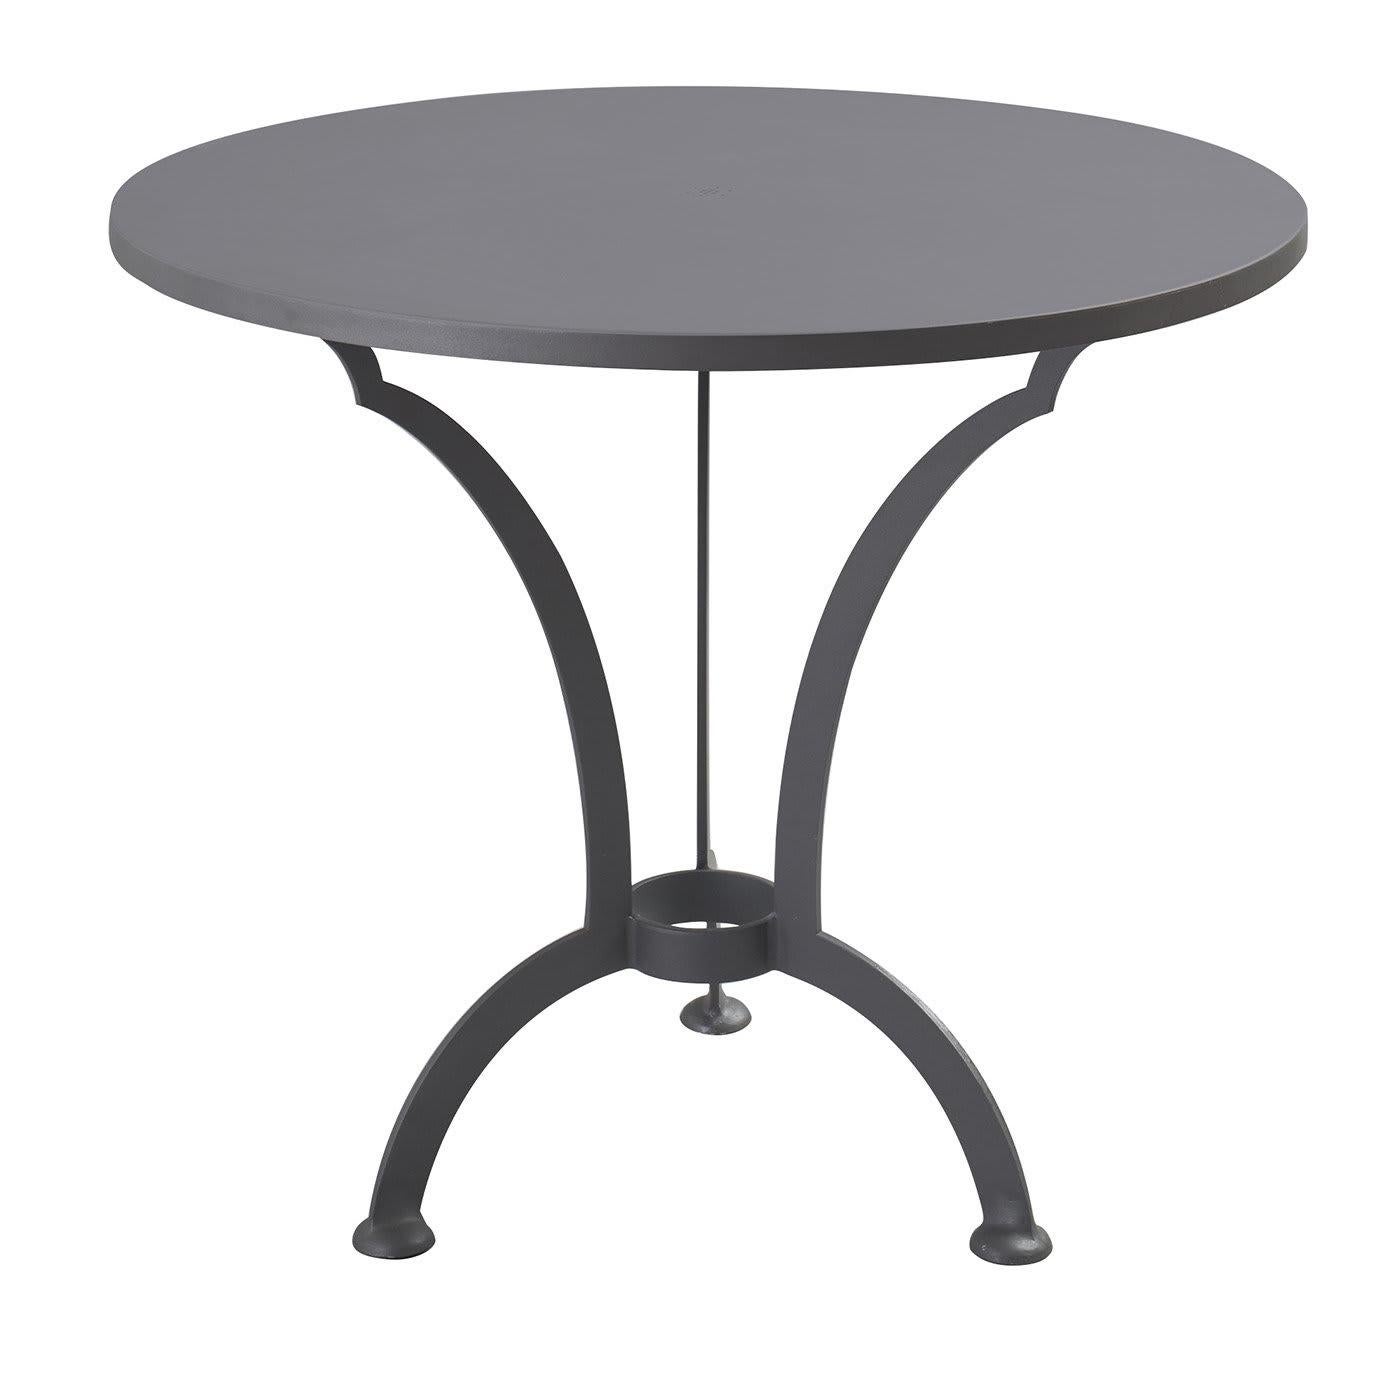 What is a small dining table called?